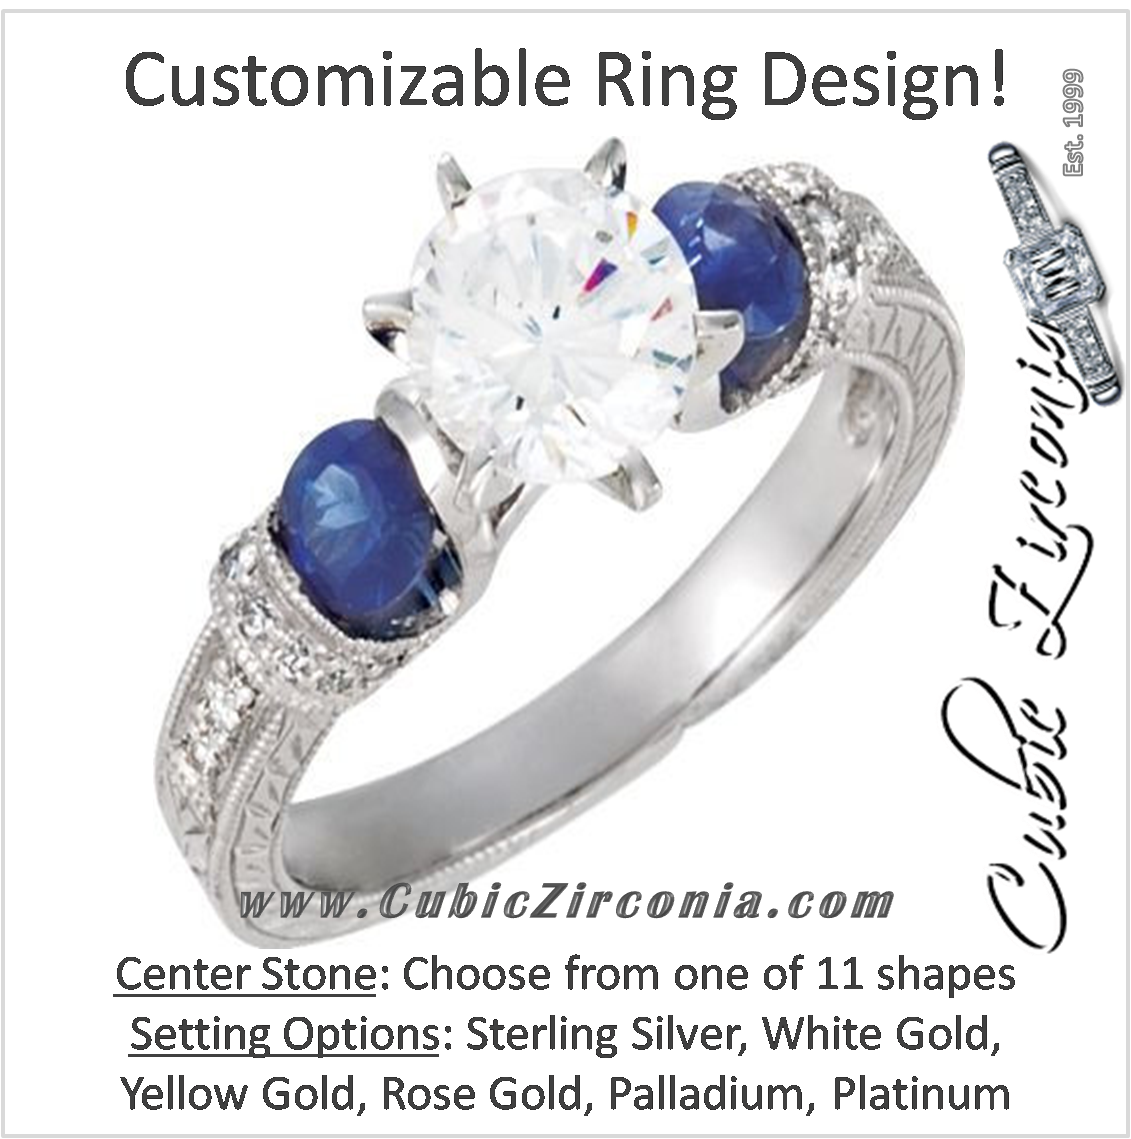 Cubic Zirconia Engagement Ring- The ________ Naming Rights 69-825 (Customizable Vintage with Engraved Band and Blue Sapphire Accents)